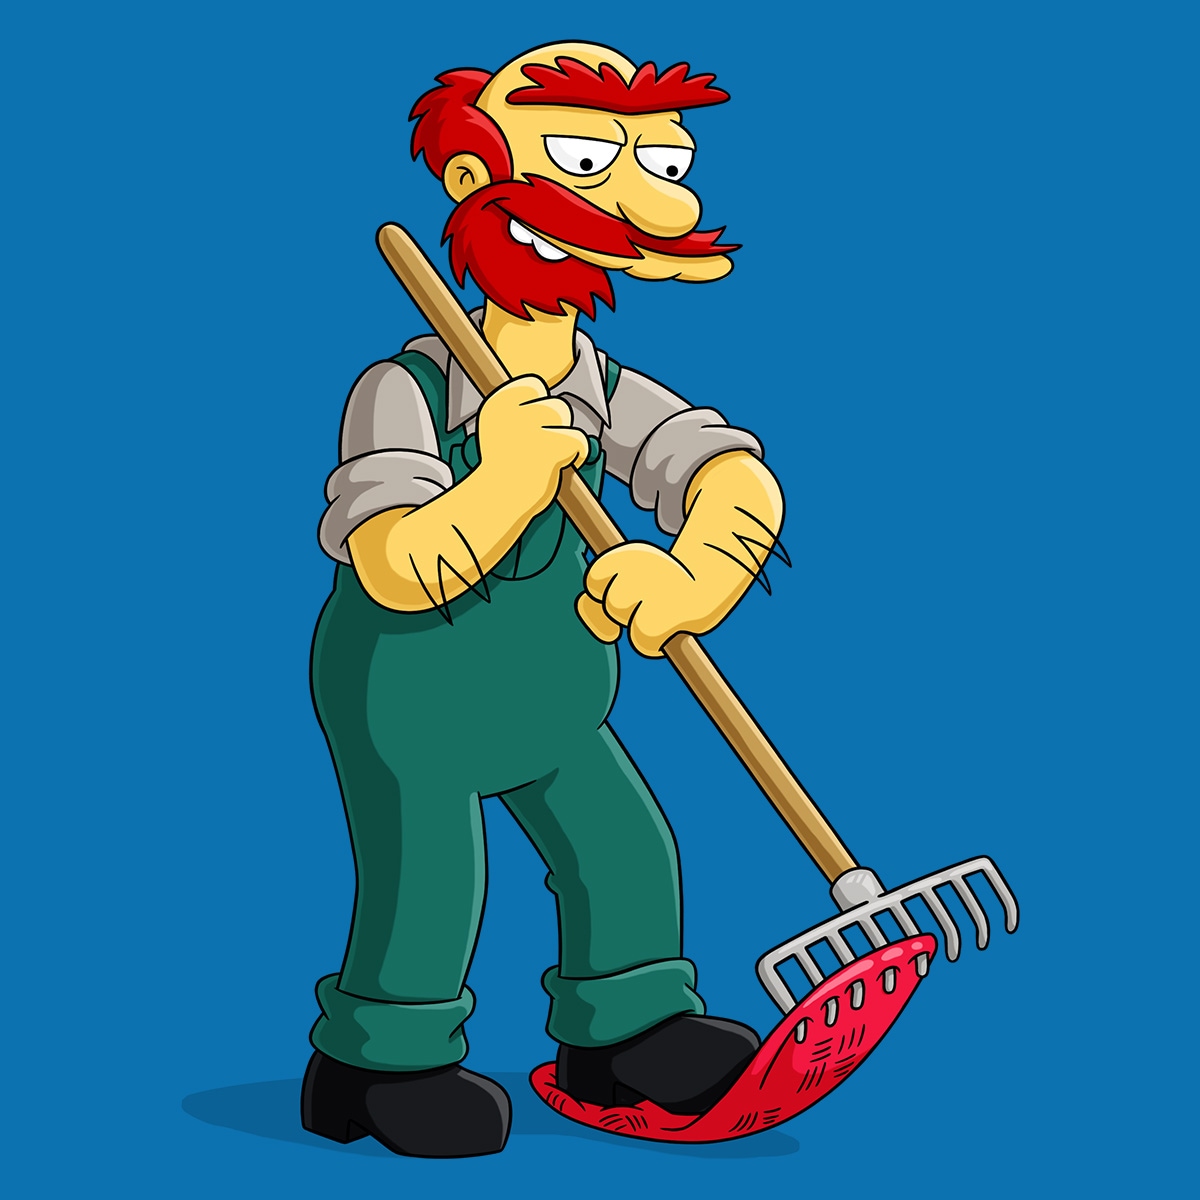 Grounds Keeper Groundskeeper Willie Simpsons World On Fxx.